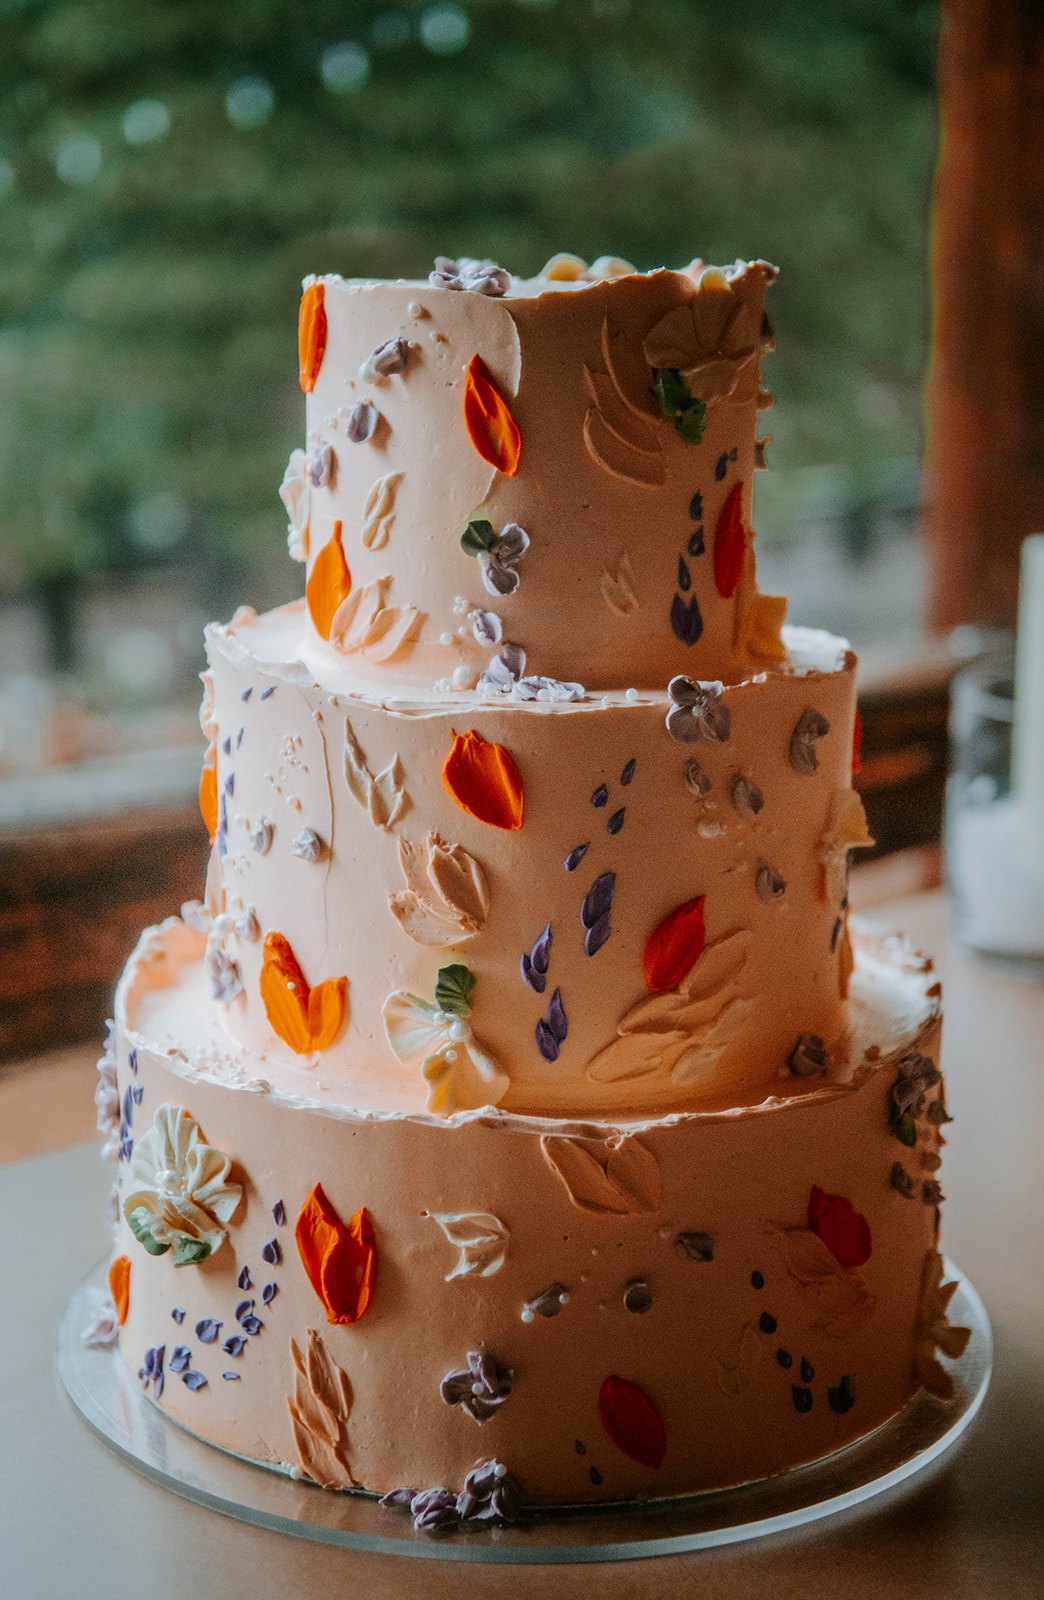 Peach wedding cake with palette knife flowers - Crumb Cakery